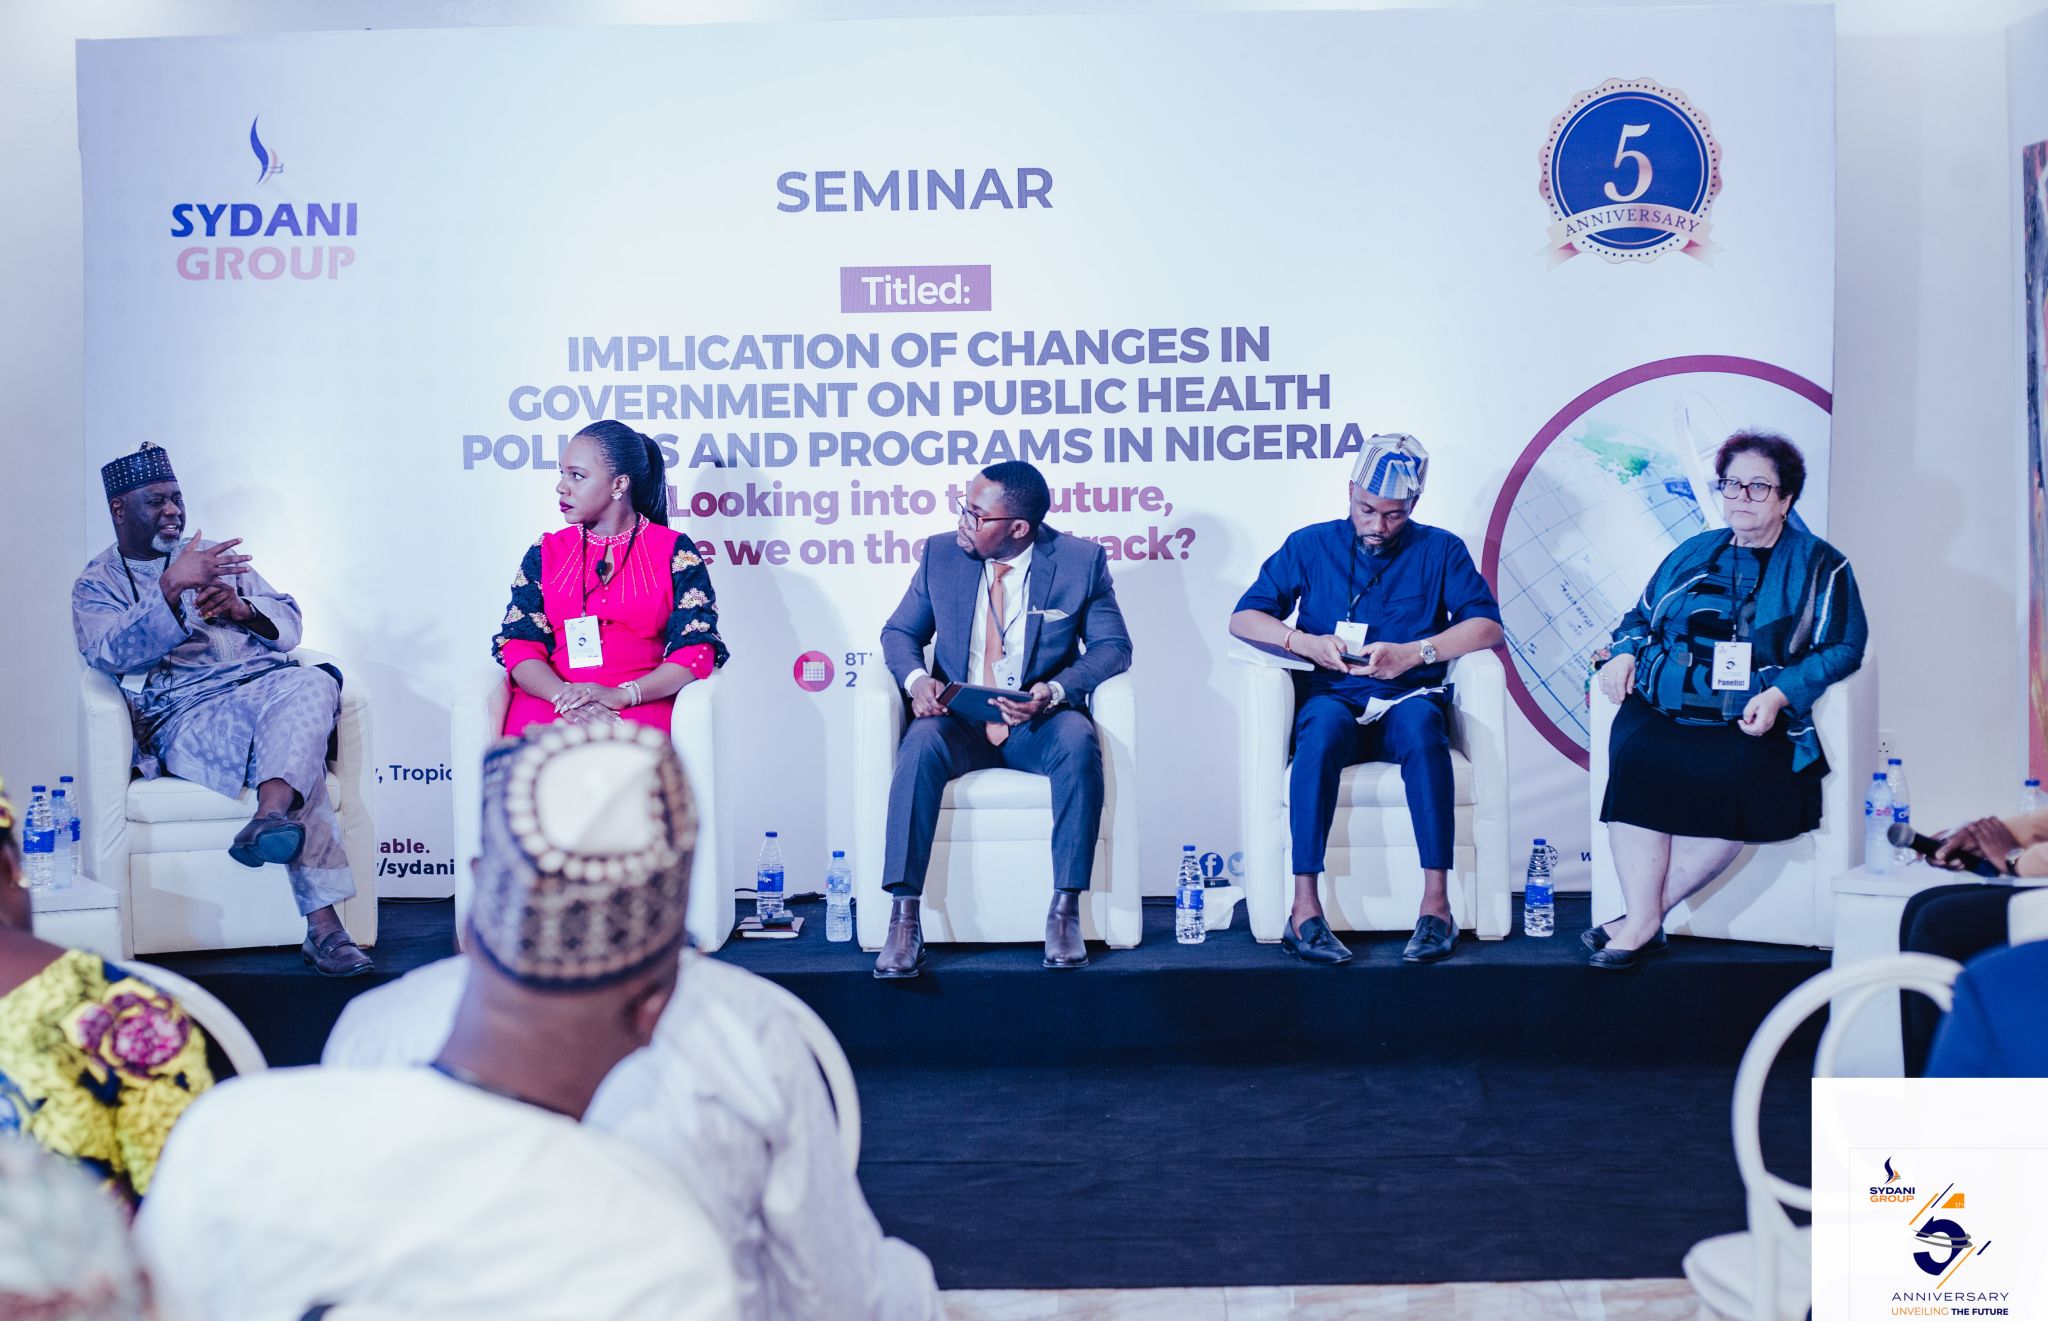 Event Highlights - Implication of Government Changes on Public Health in Nigeria 🌍🏥(Sydani At 5 Seminar)